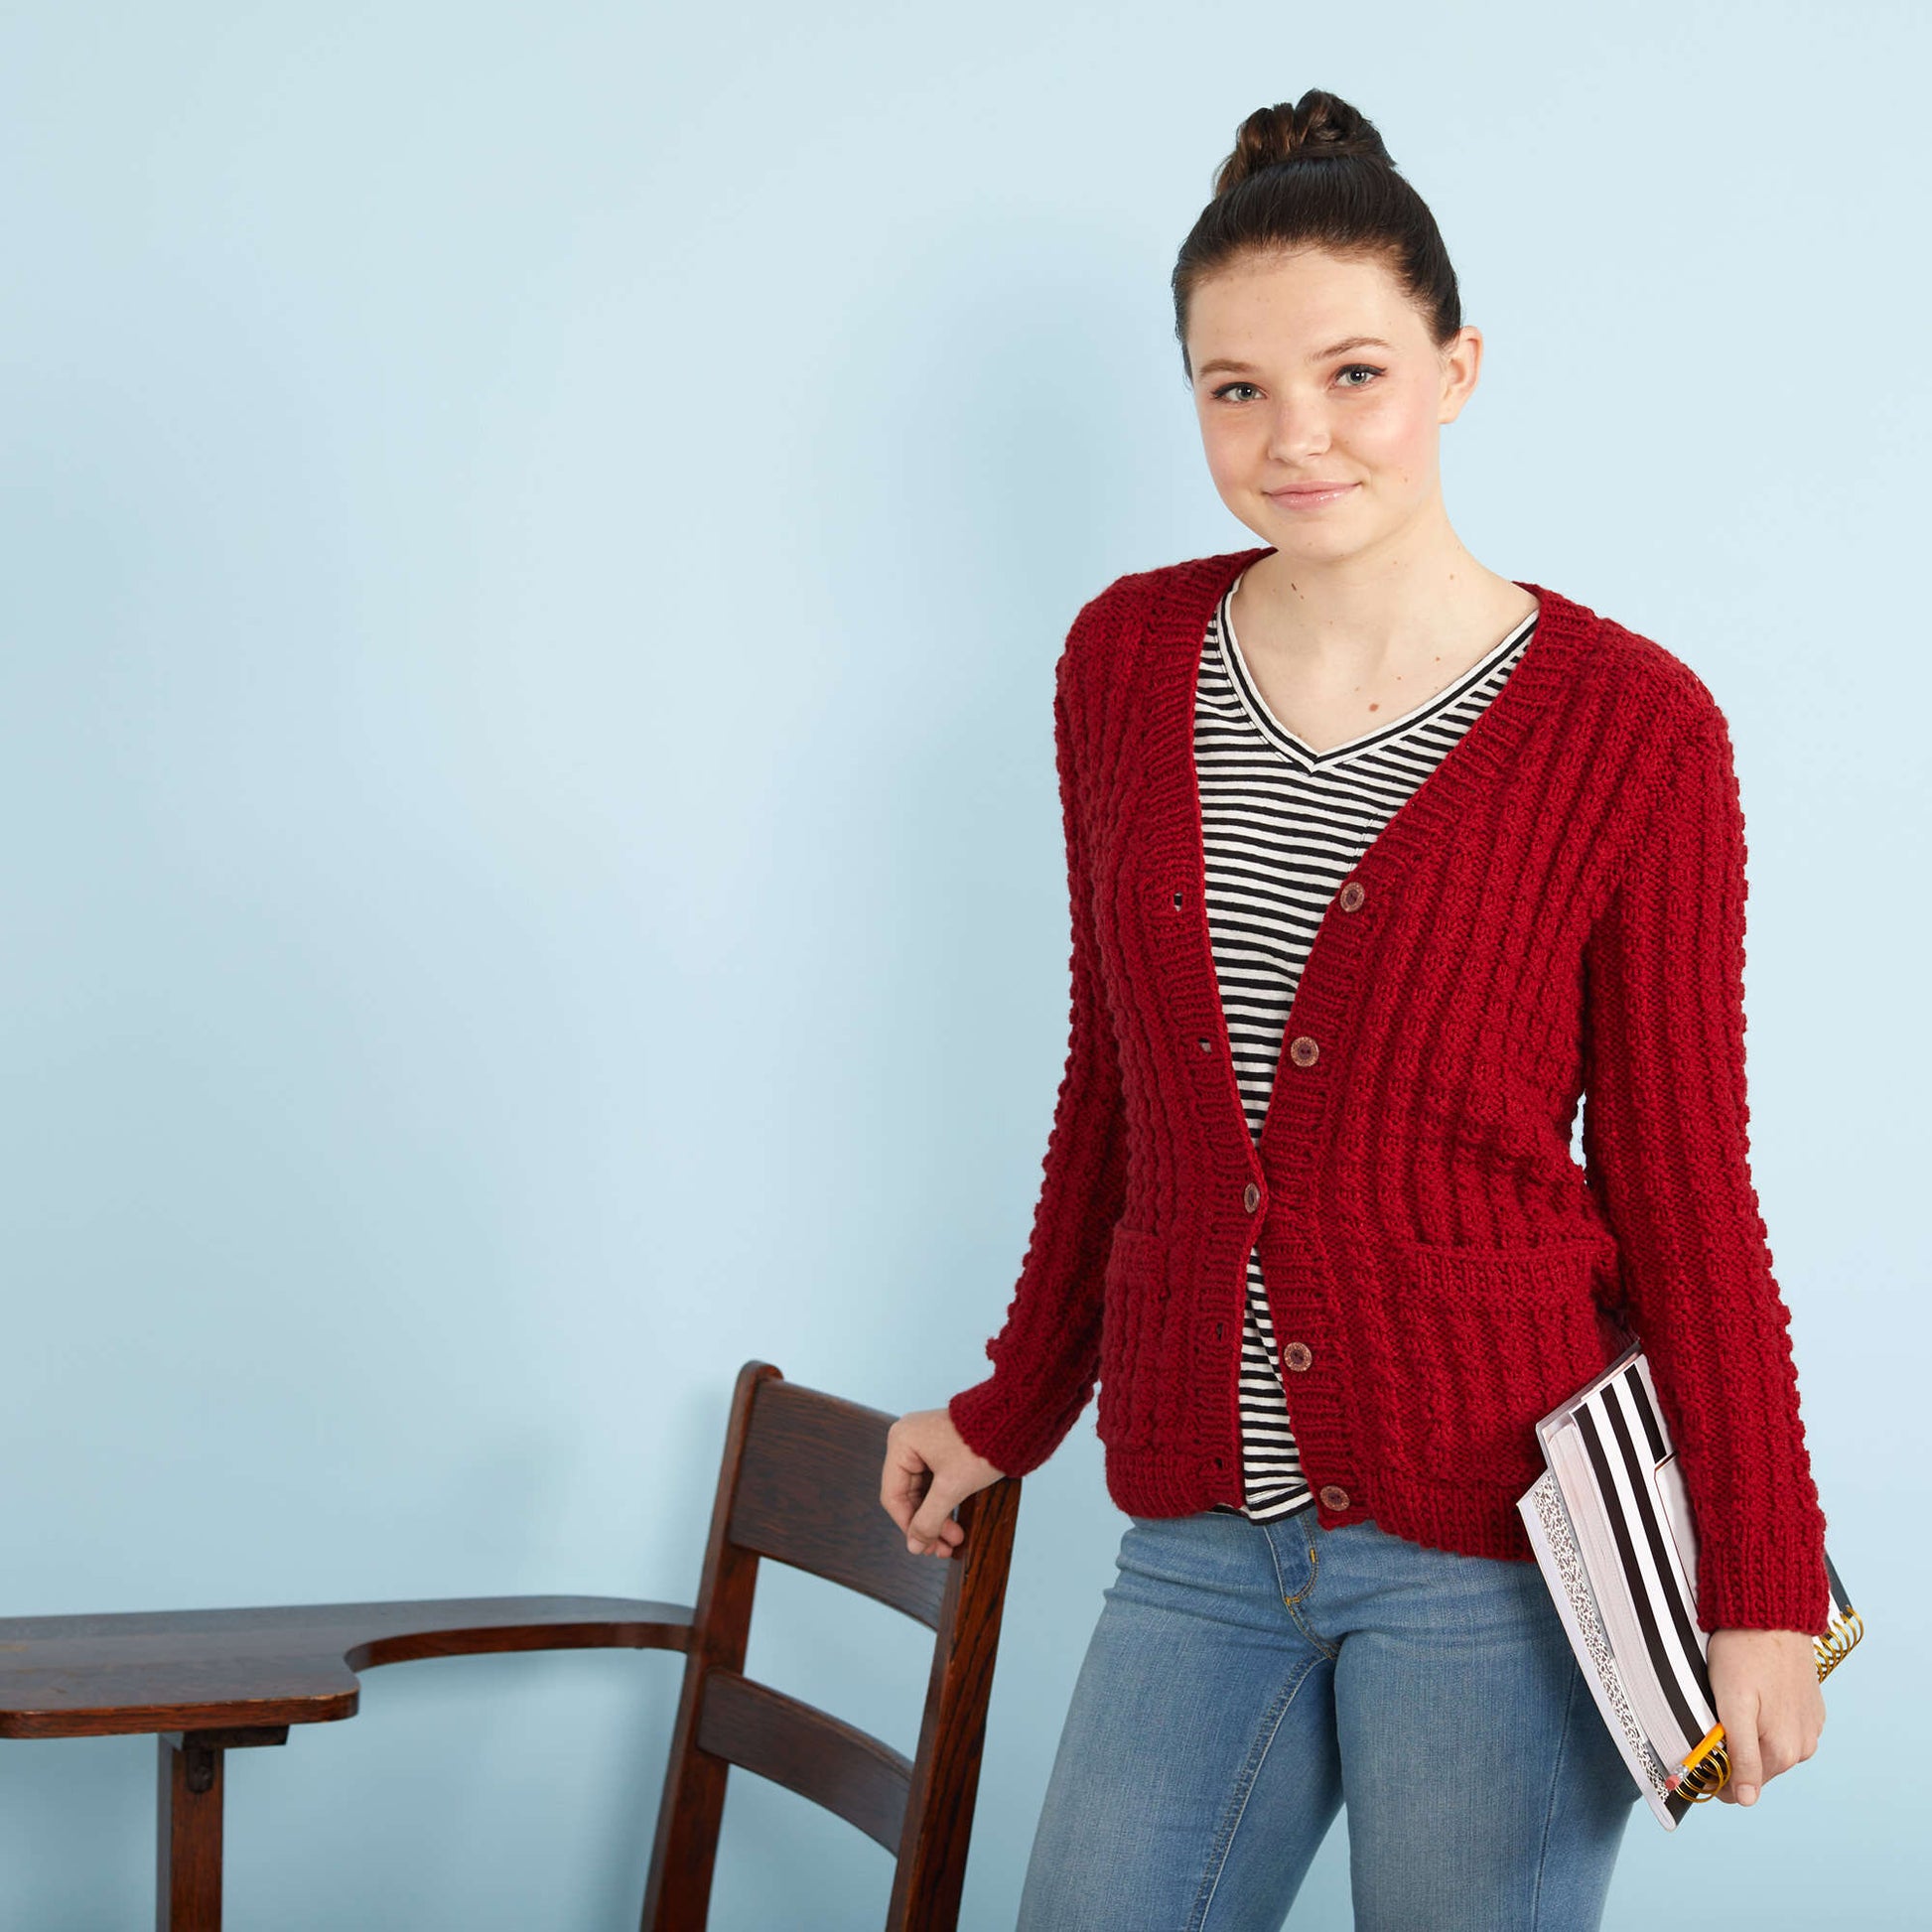 Free Red Heart Chillin' Out Knit Cardigan Pattern